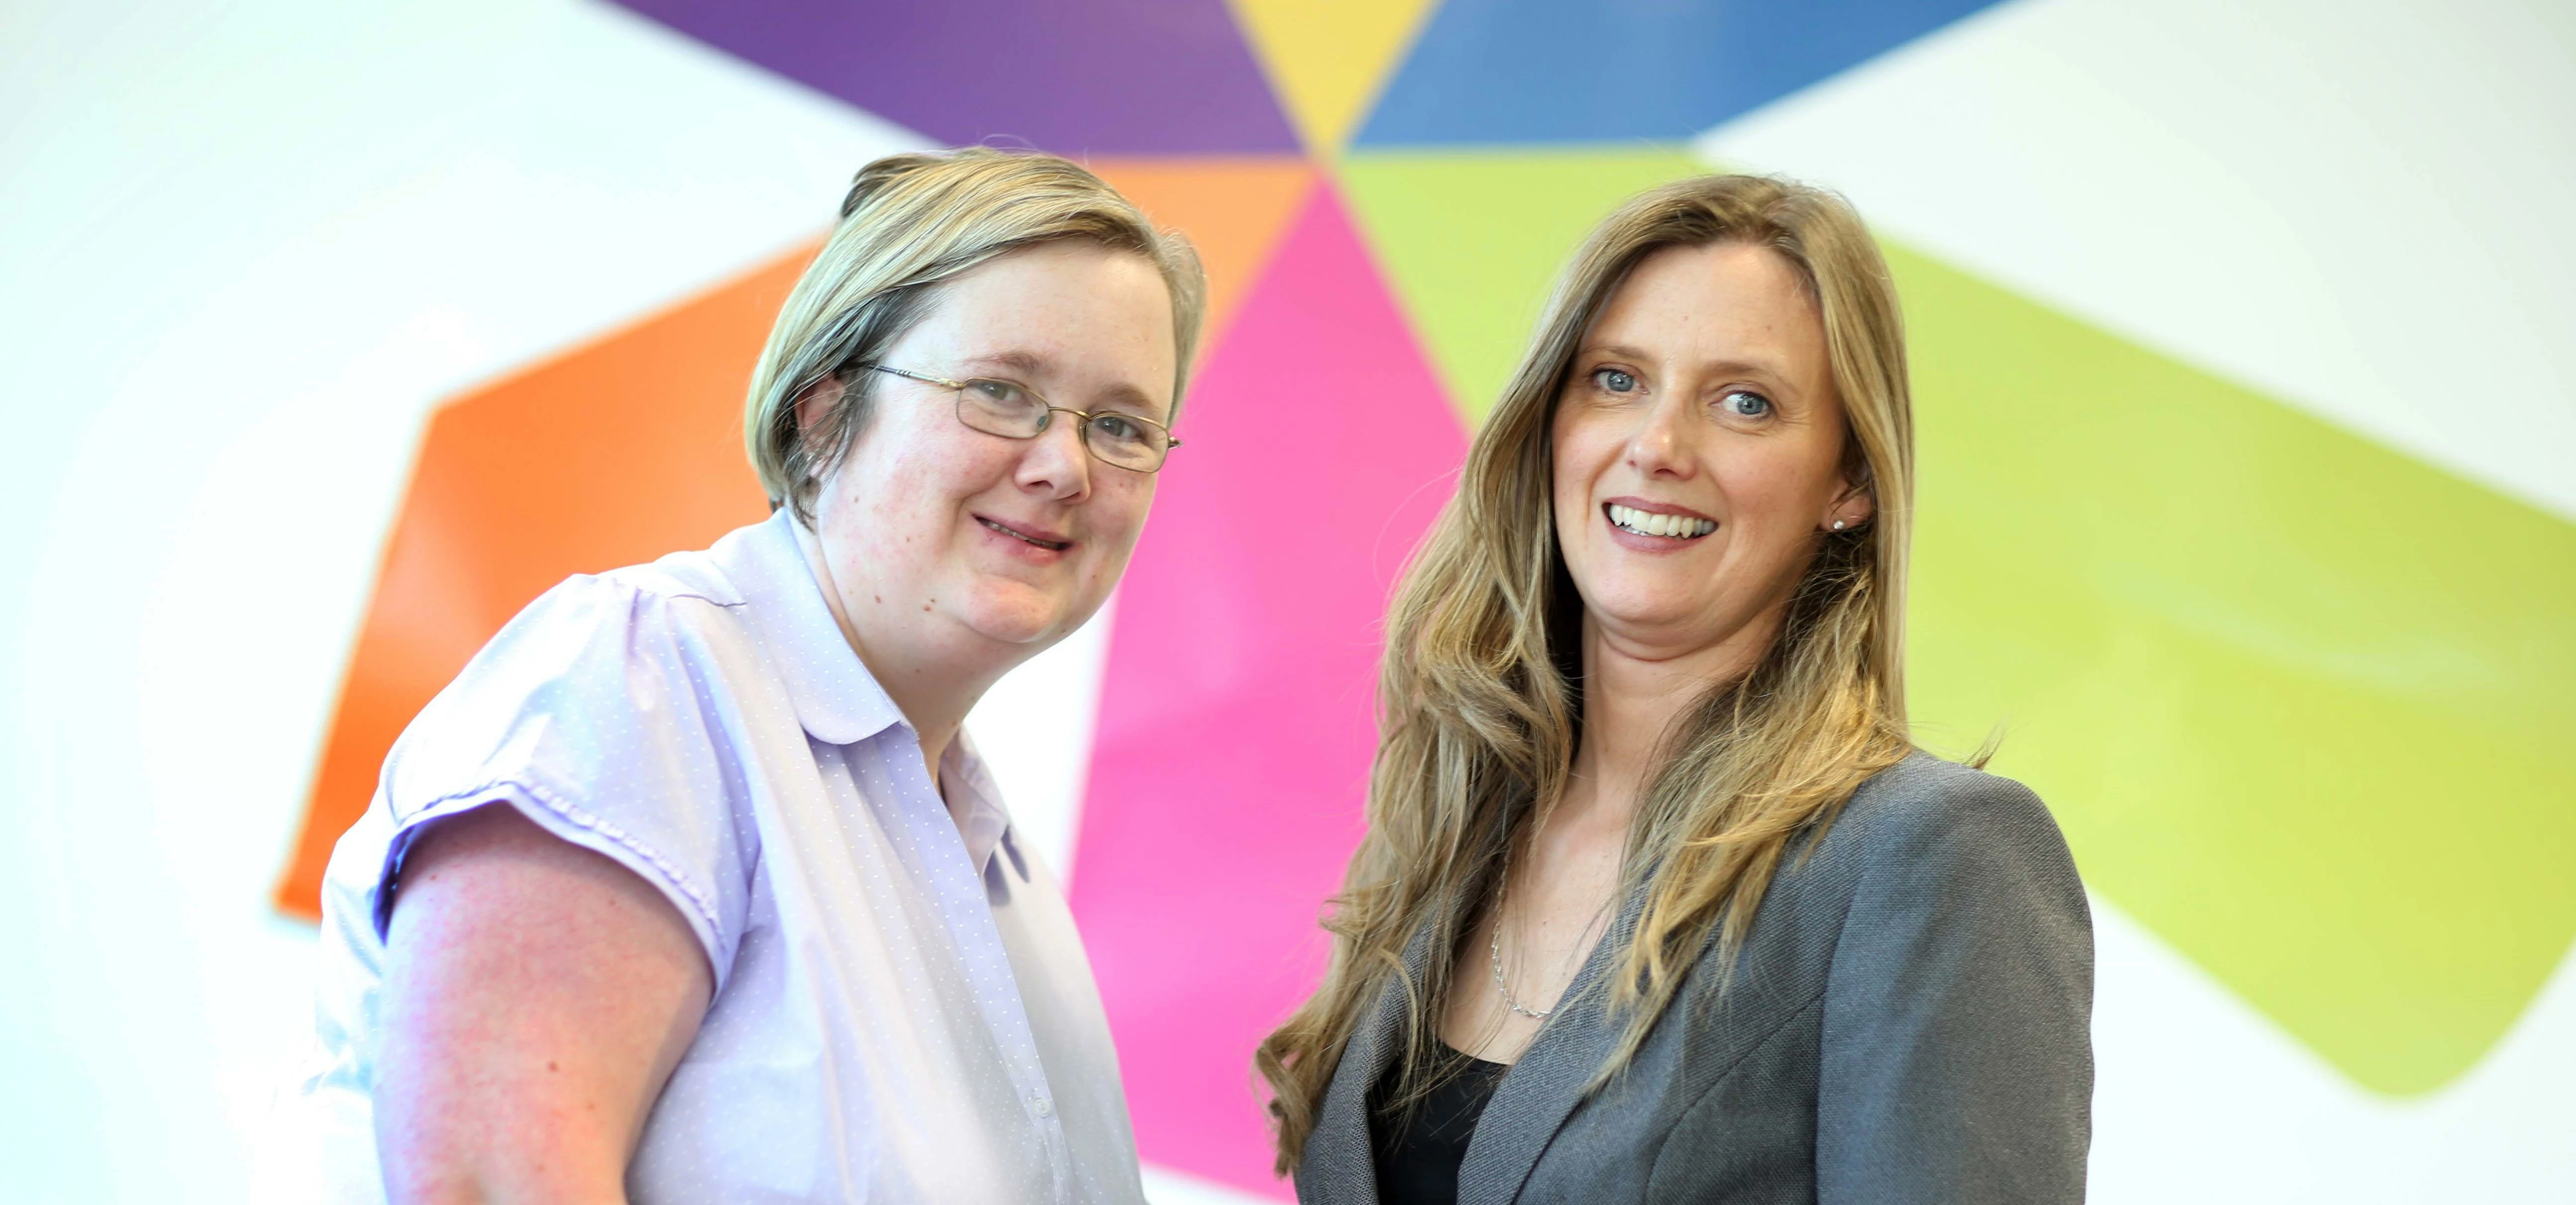 New recruits, Eileen Walker (left) and Melanie Cant who have joined Valued Accountancy